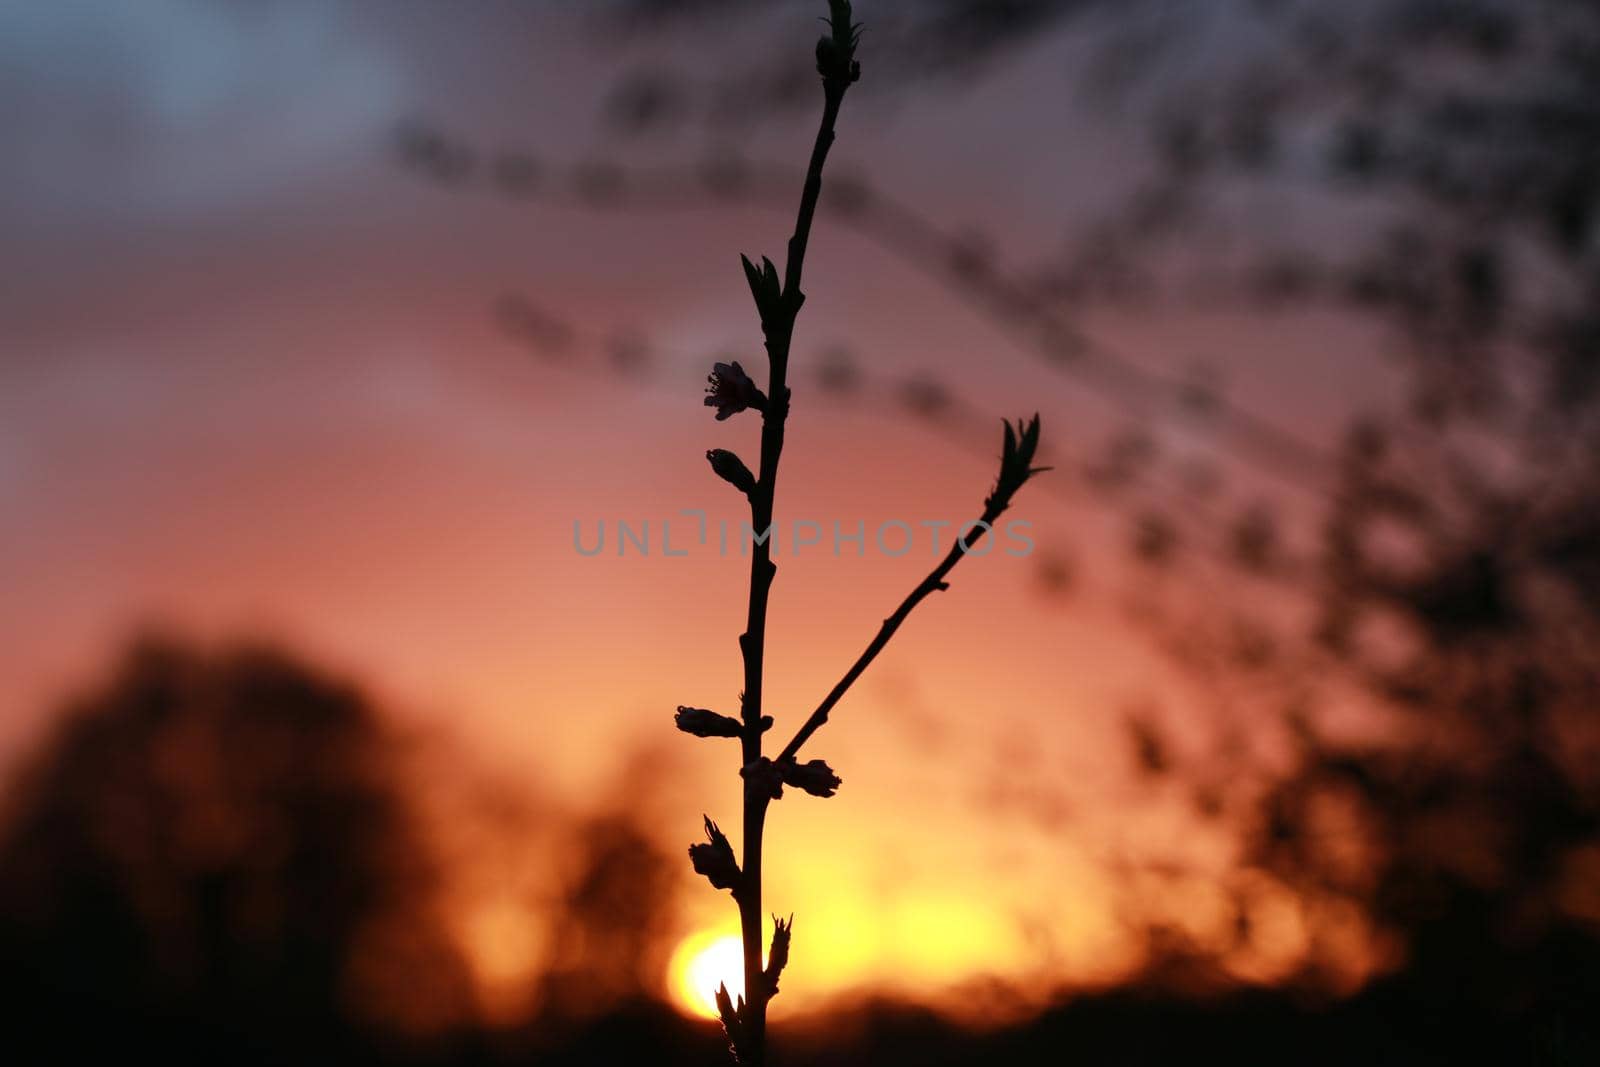 Small peach tree in front of a sunset by Luise123